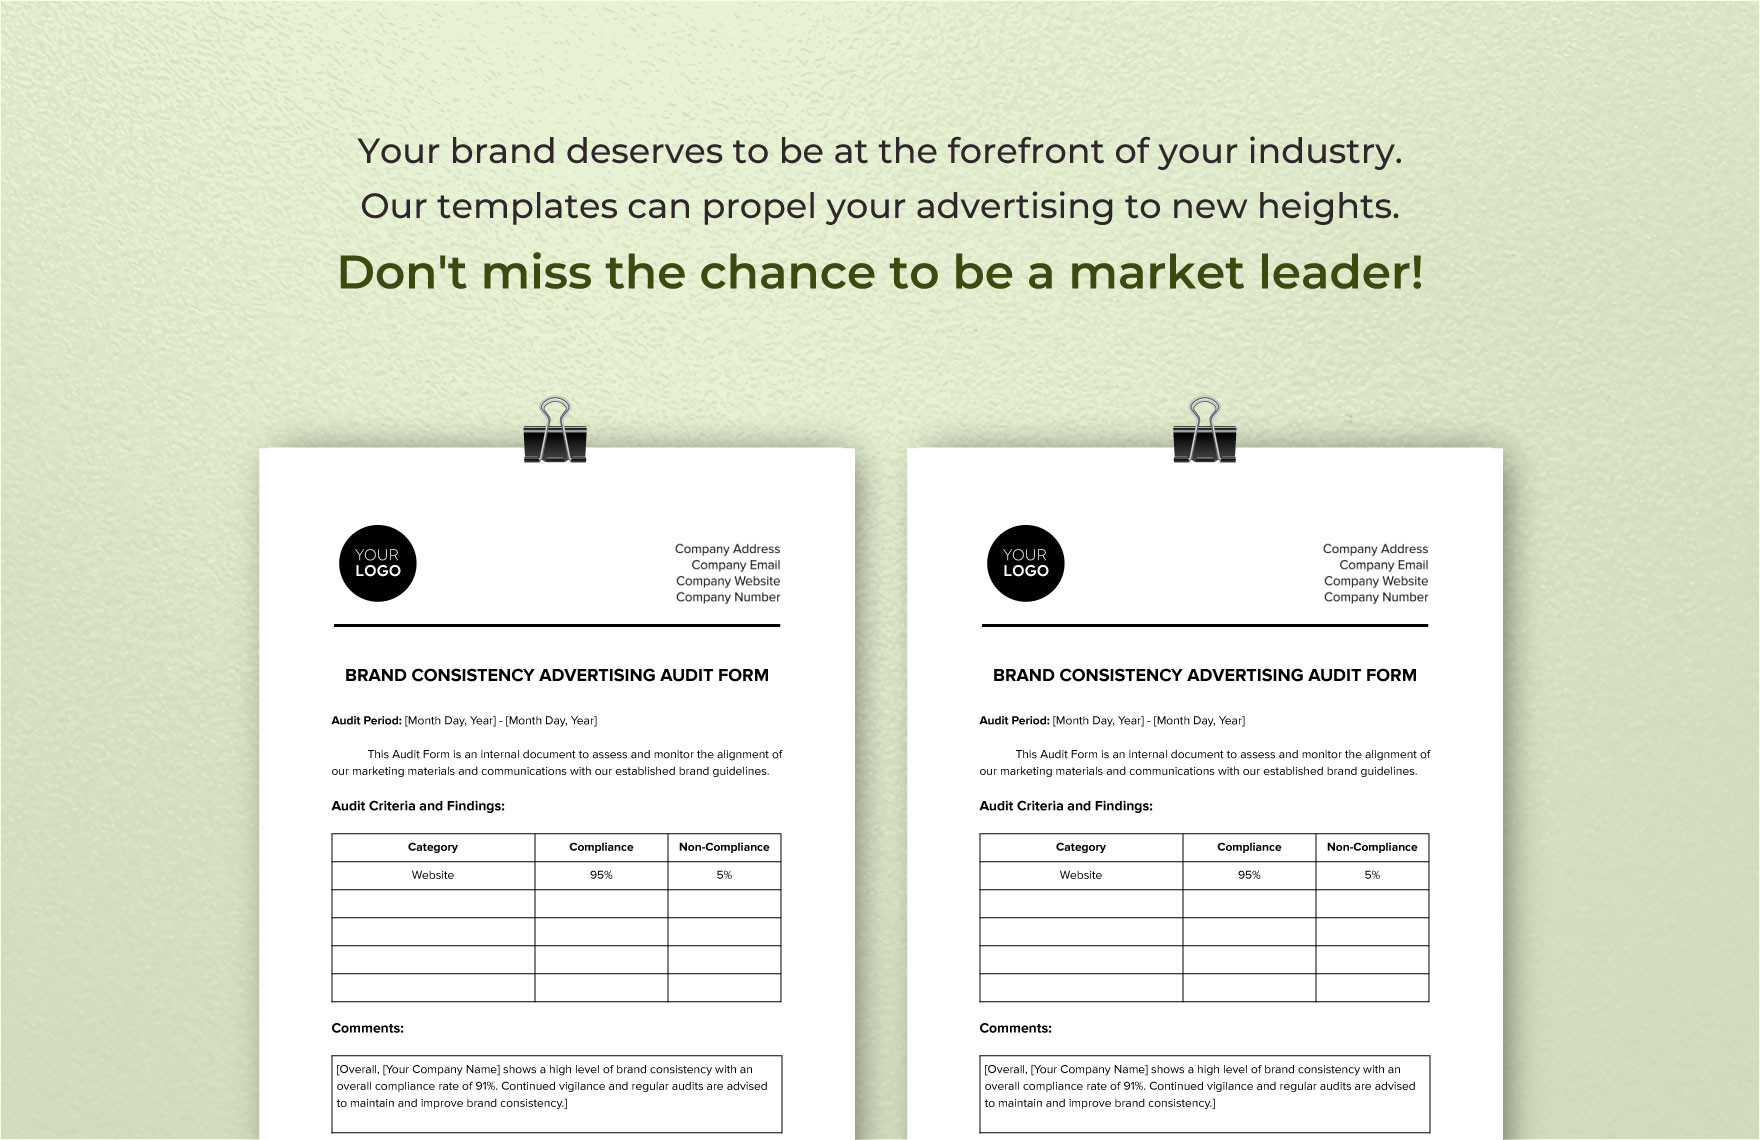 Brand Consistency Advertising Audit Form Template